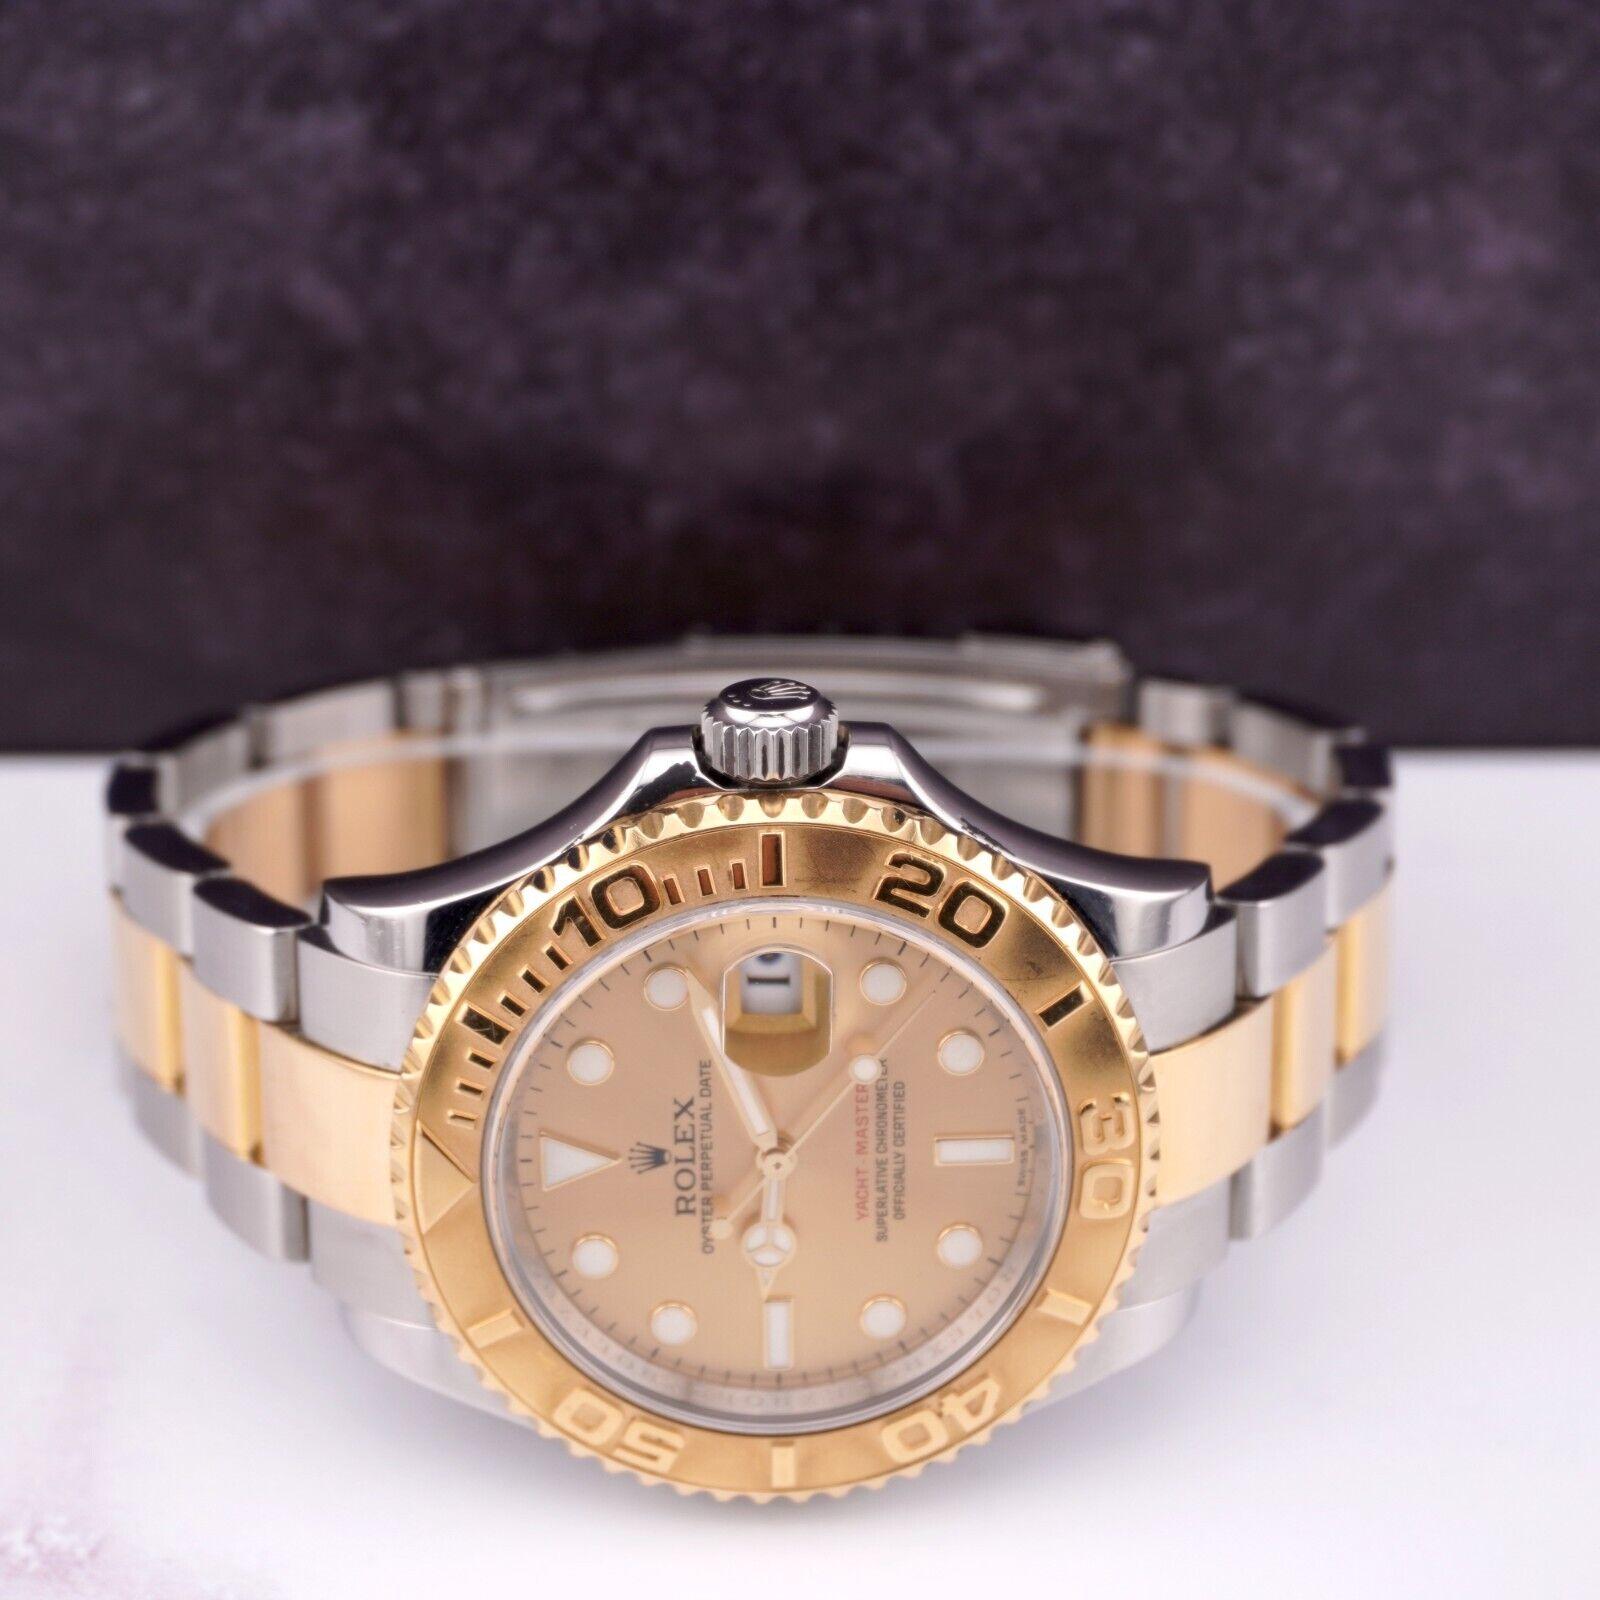 Rolex Yacht-Master Oyster Perpetual 40mm Watch

Pre-owned w/ Original Box & Card
100% Authentic Authenticity Card
Condition - (Great Condition) - See Pics
Watch Reference - 16623
Model - Yacht-Master
Dial Color - Gold
Material - 18k Yellow